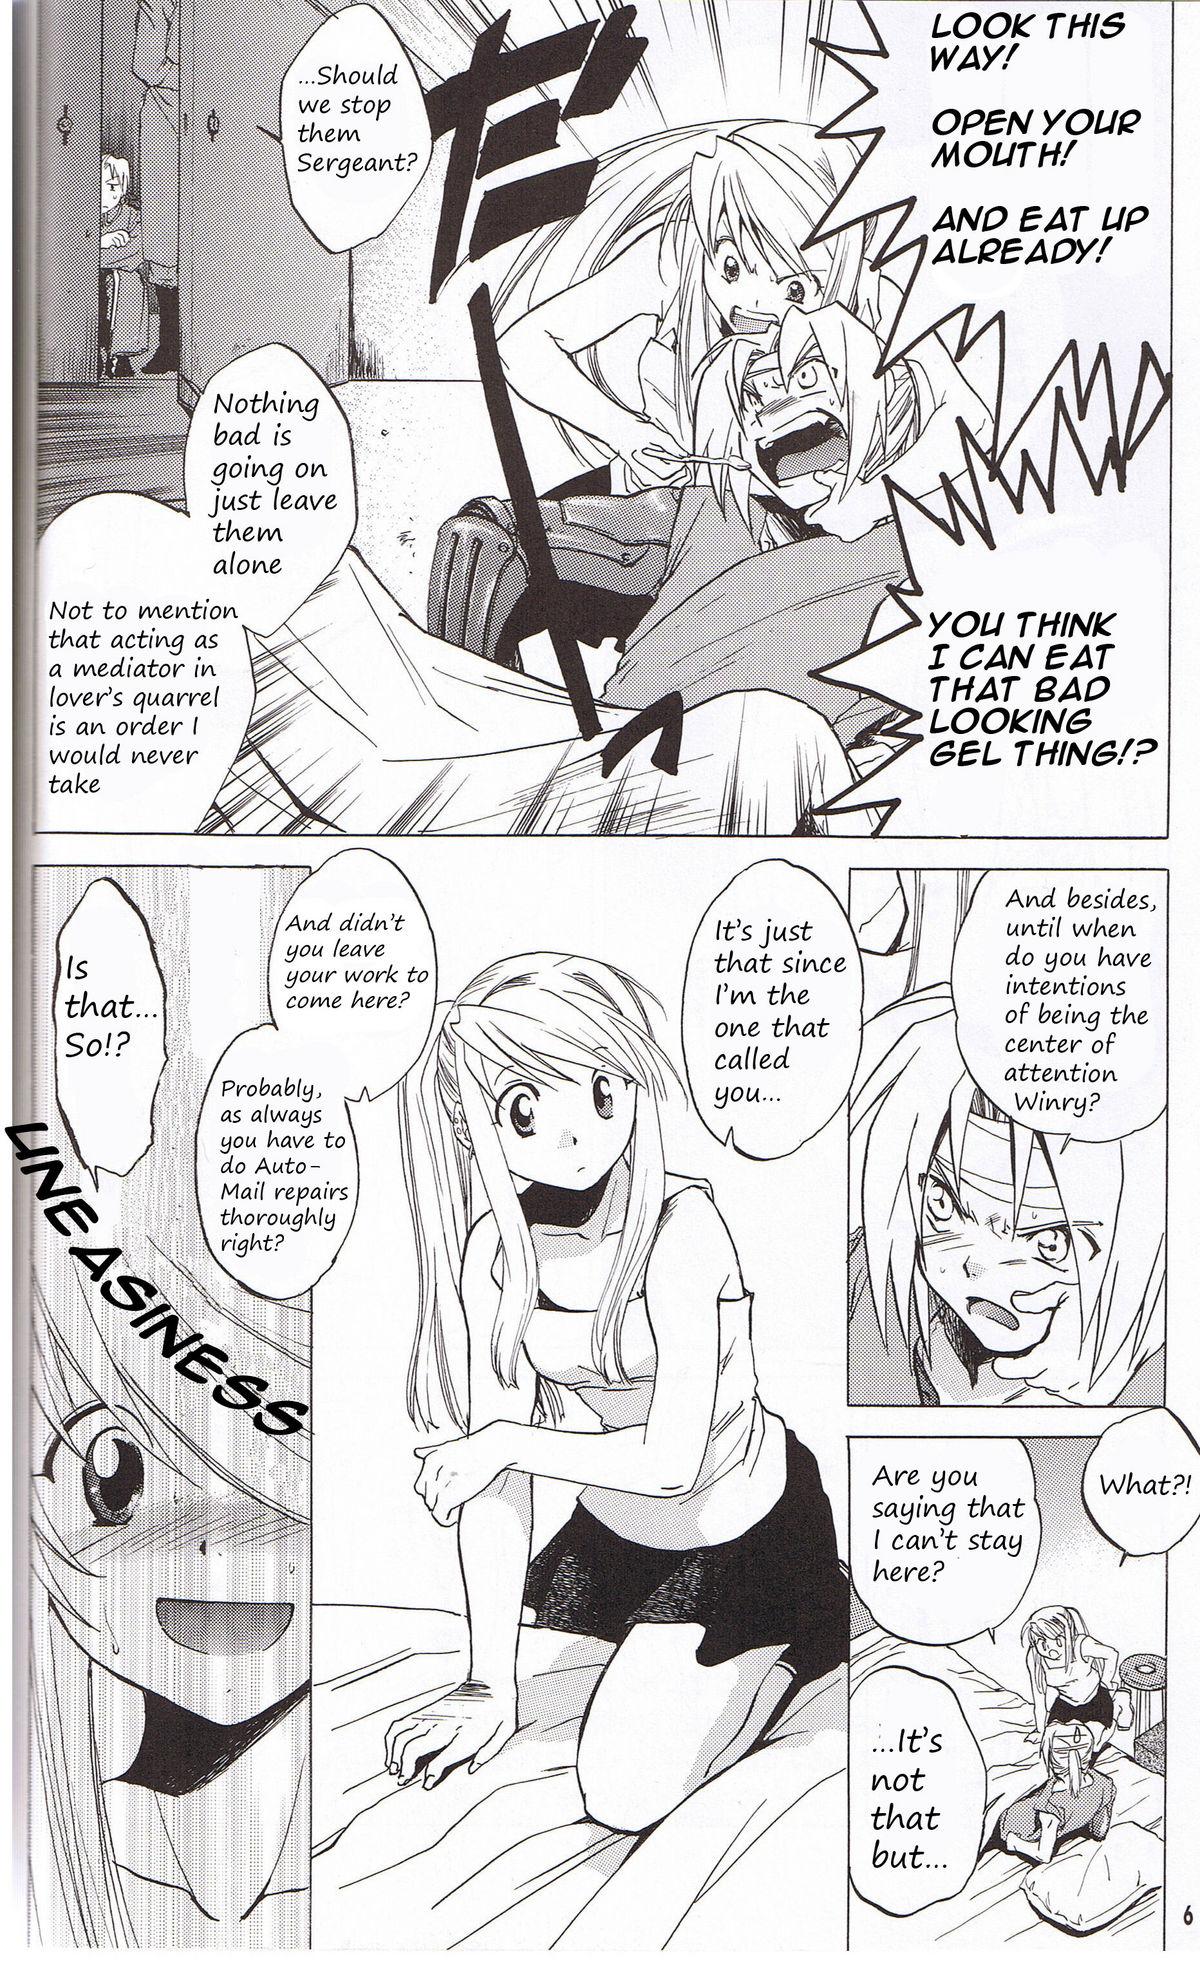 Real Amature Porn EDxWIN - Fullmetal alchemist Guyonshemale - Page 5